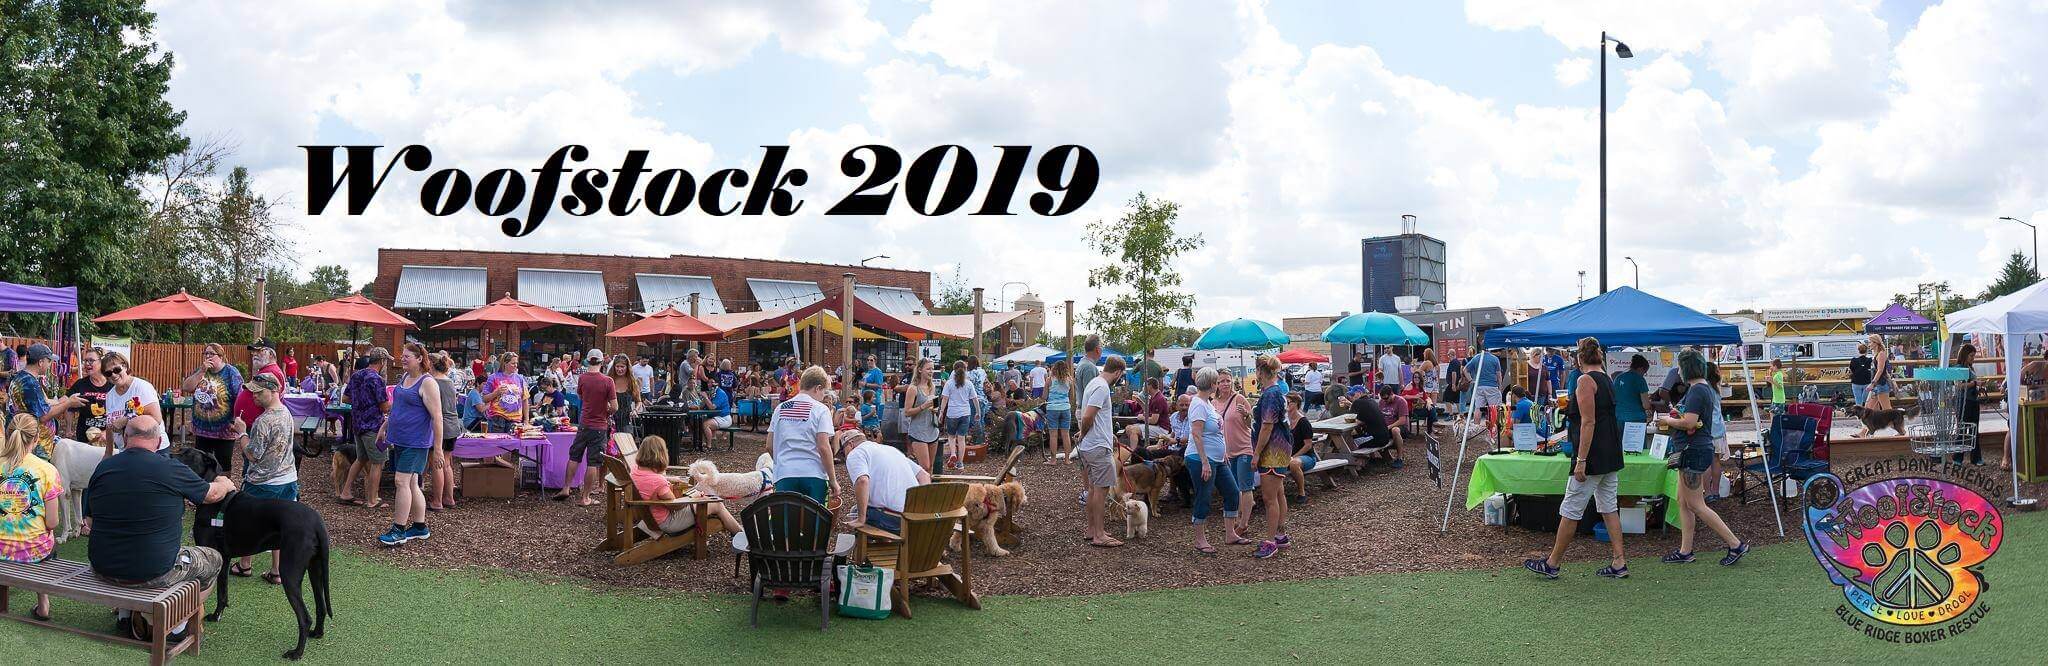 Woofstock 2019 in Charlotte NC at NoDa Brewery